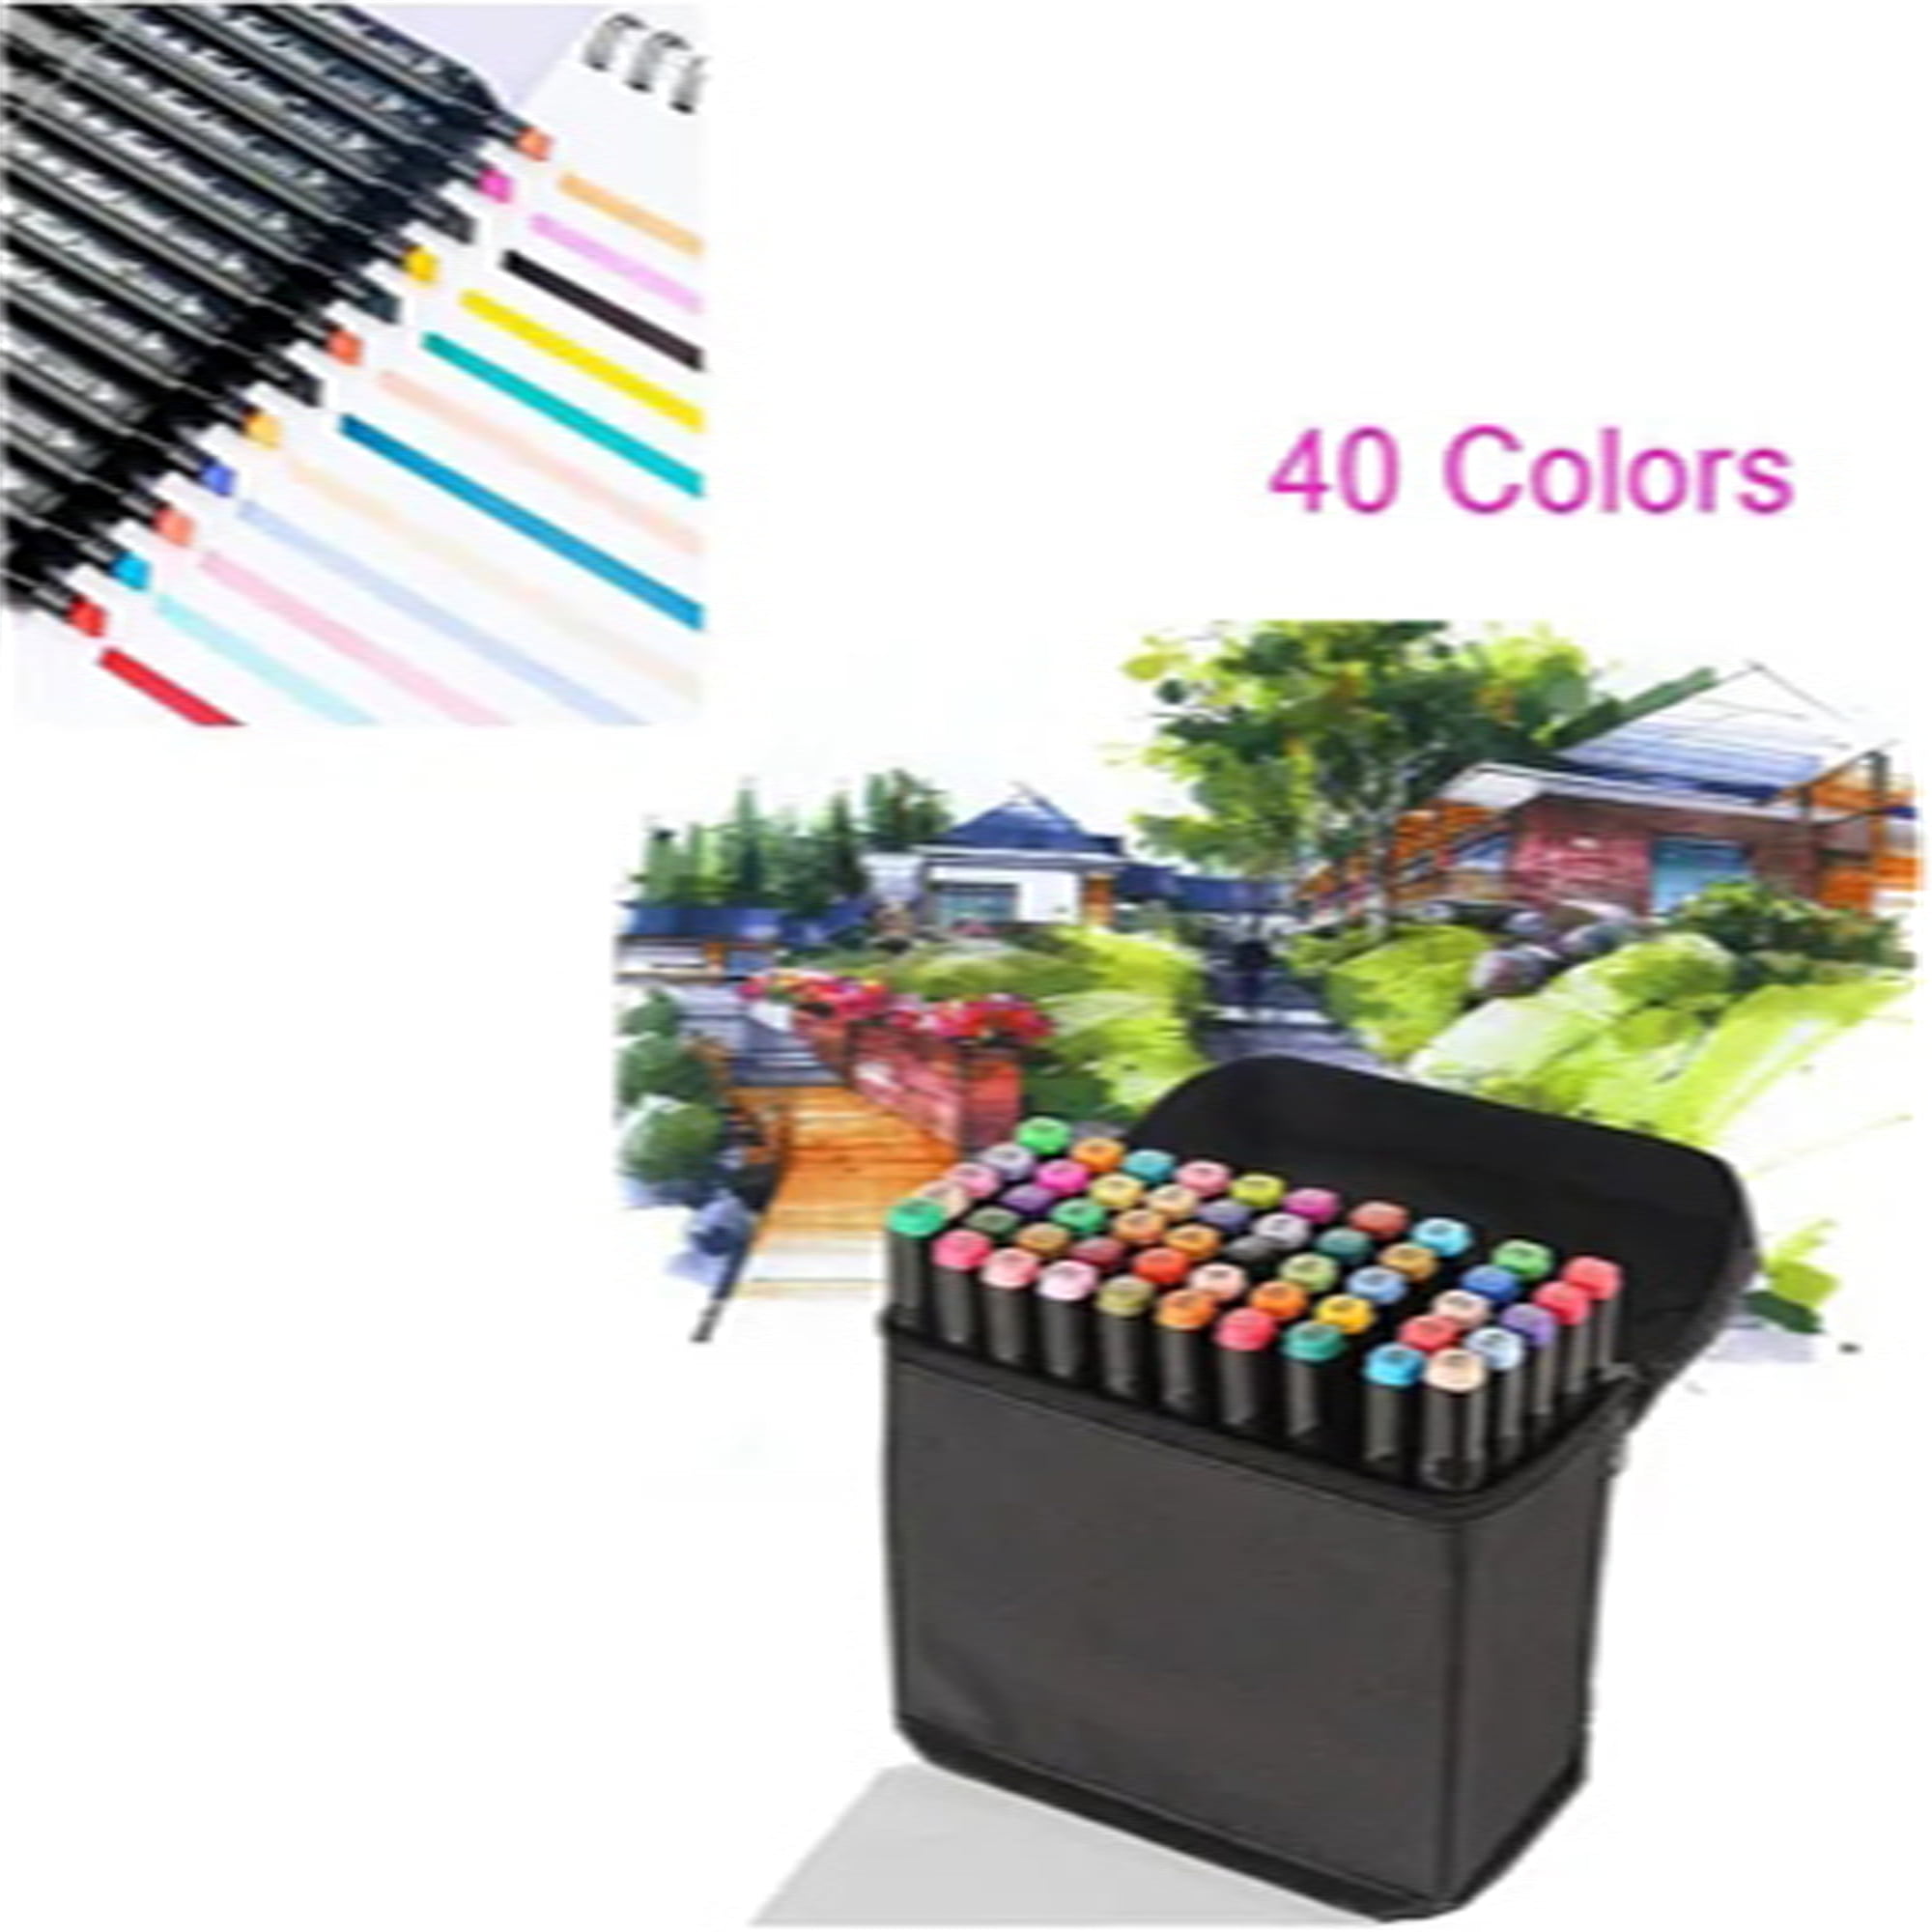 CHENYU 30/40/60/80Pcs Alcohol markers Manga Drawing Markers Pen Alcohol  Based Non Toxic Sketch Oily Twin Brush Pen Art Supplies